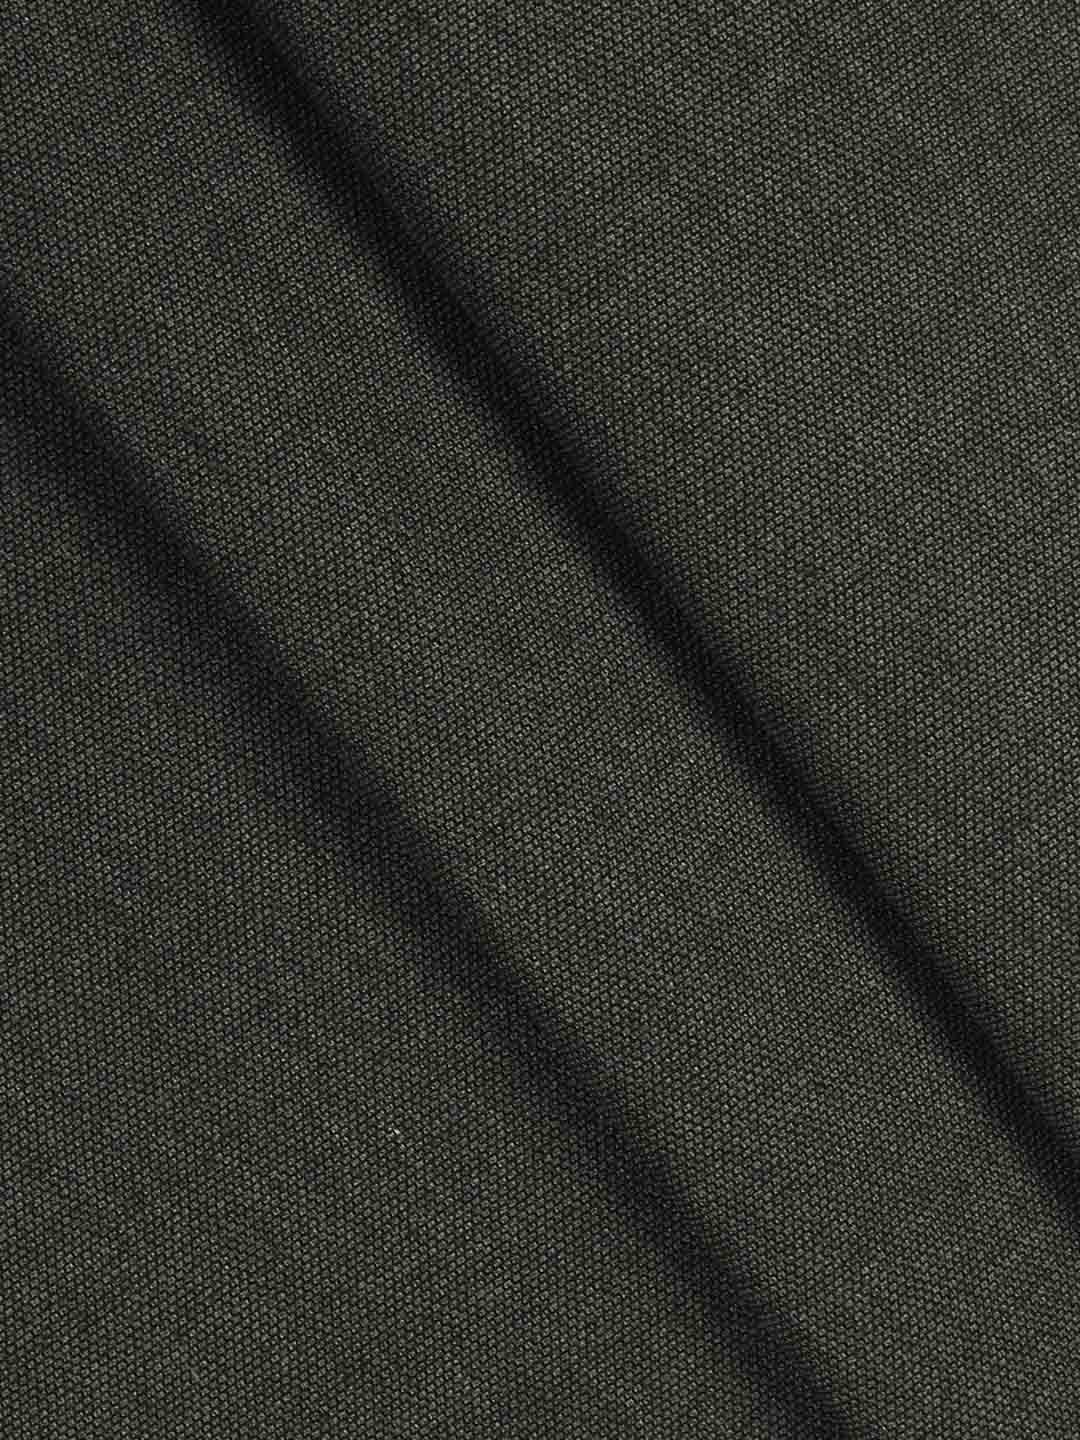 Cotton Super Stretch Grey Suiting Fabric-Icle Stretch